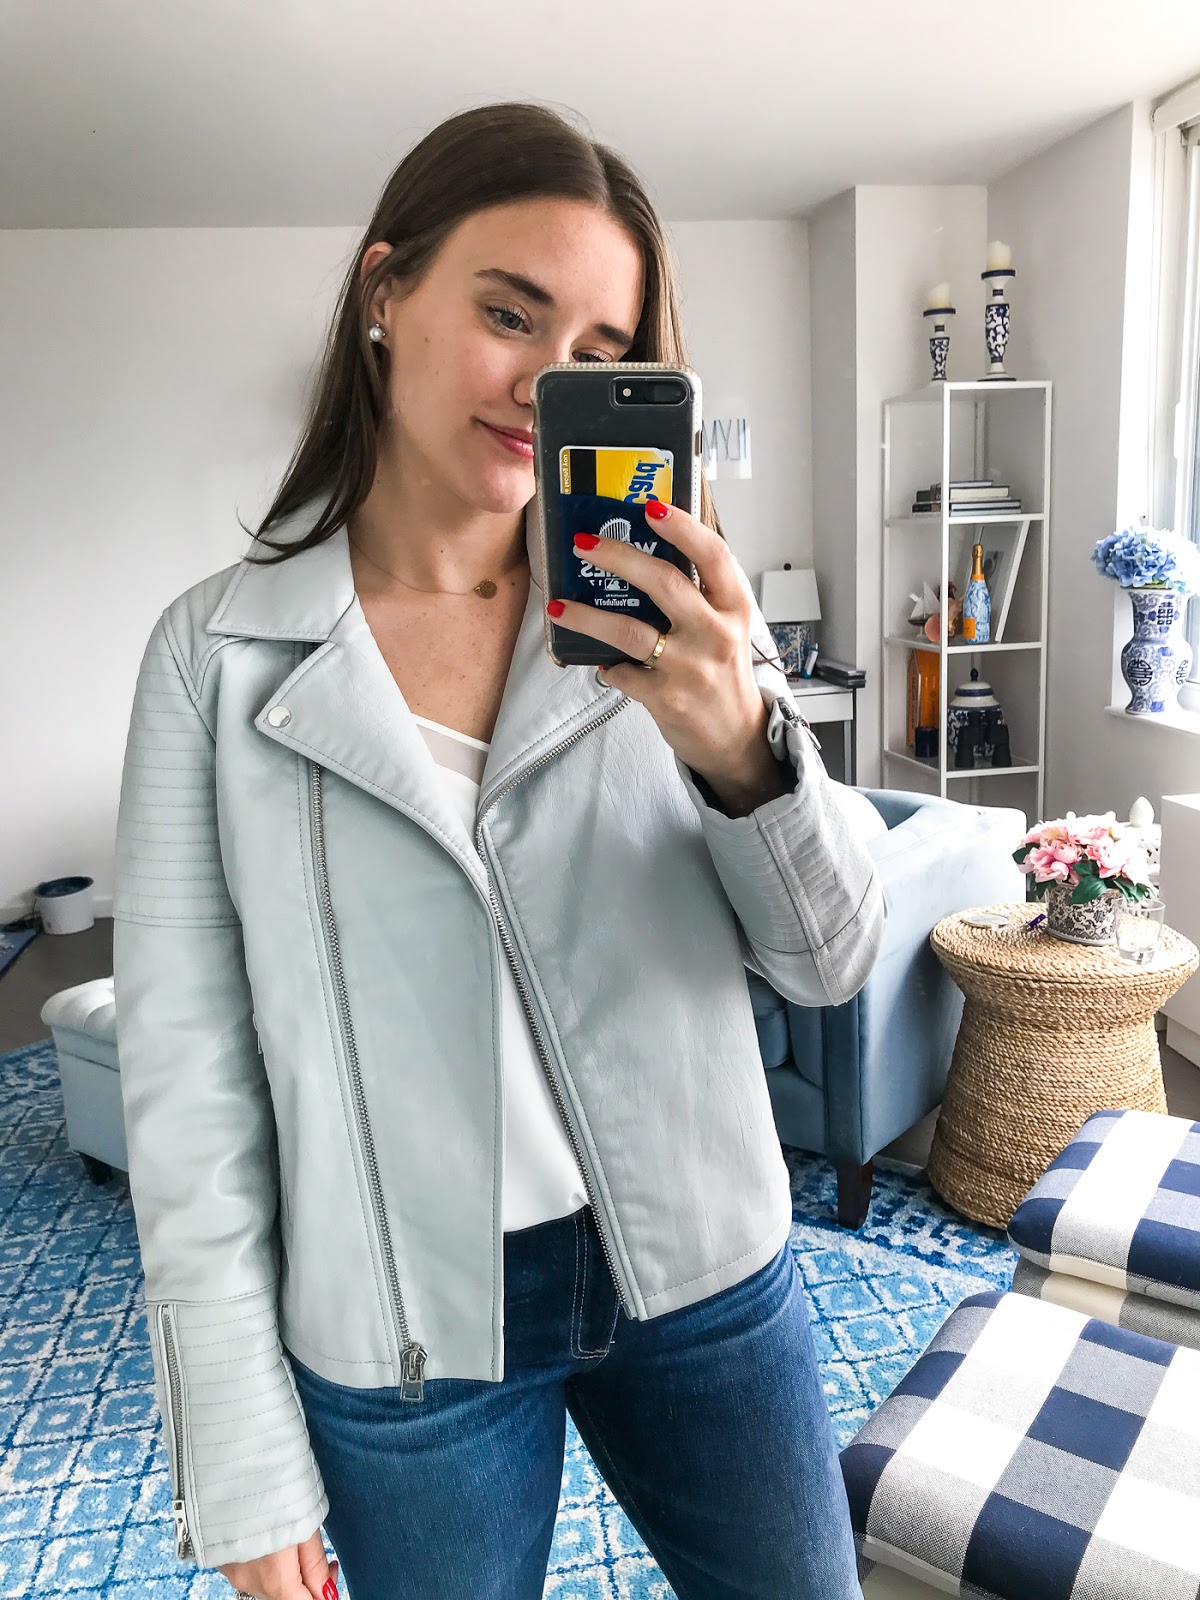 What I Bought From the Nordstrom Anniversary Sale featured by popular New York fashion blogger, Covering the Bases